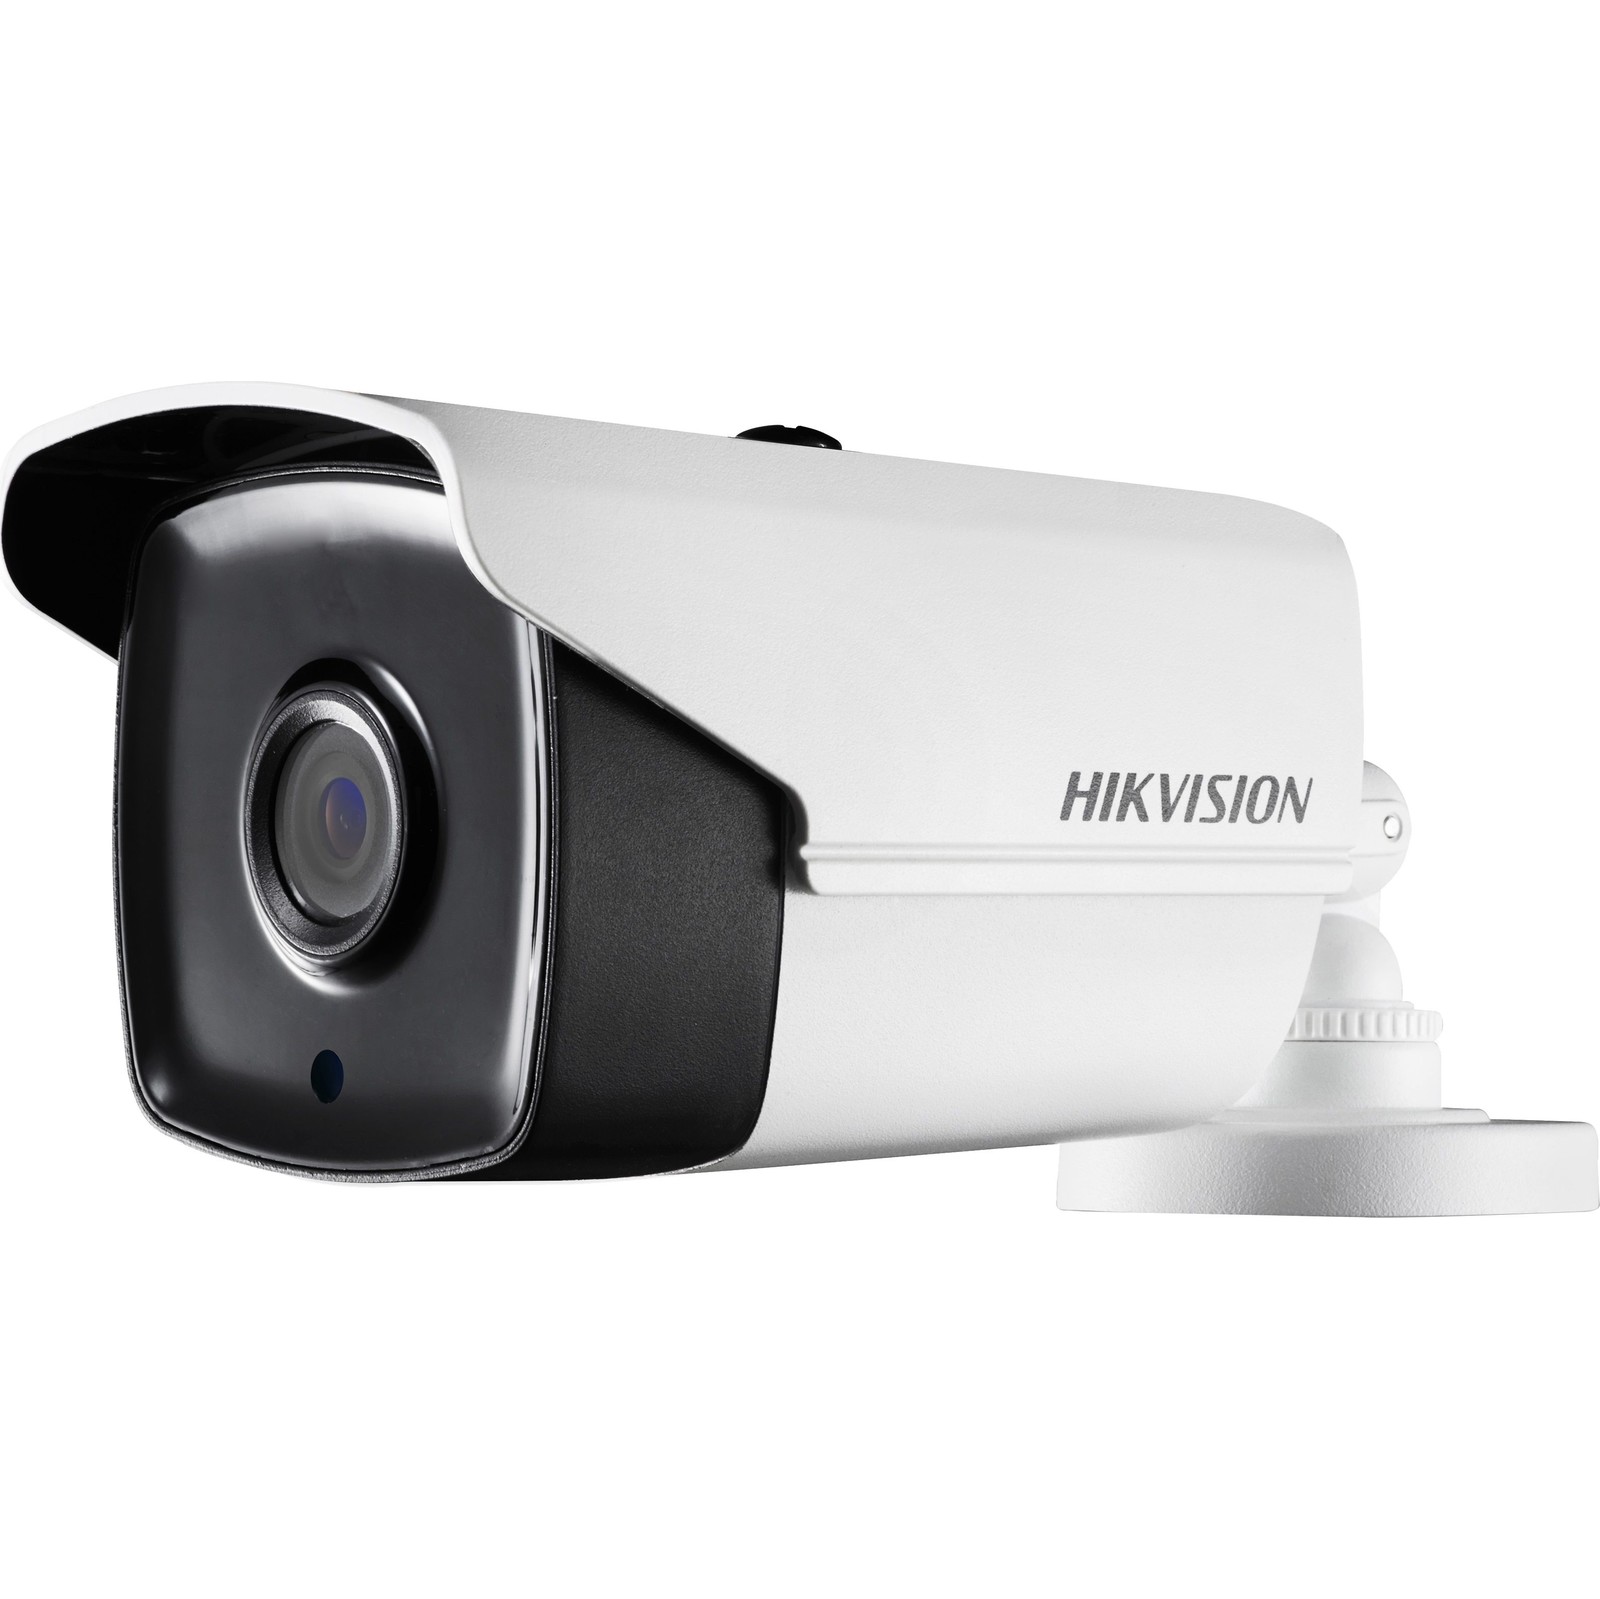 You Recently Viewed Hikvision DS-2CE16D8T-IT3E 2MP External Bullet Camera Image